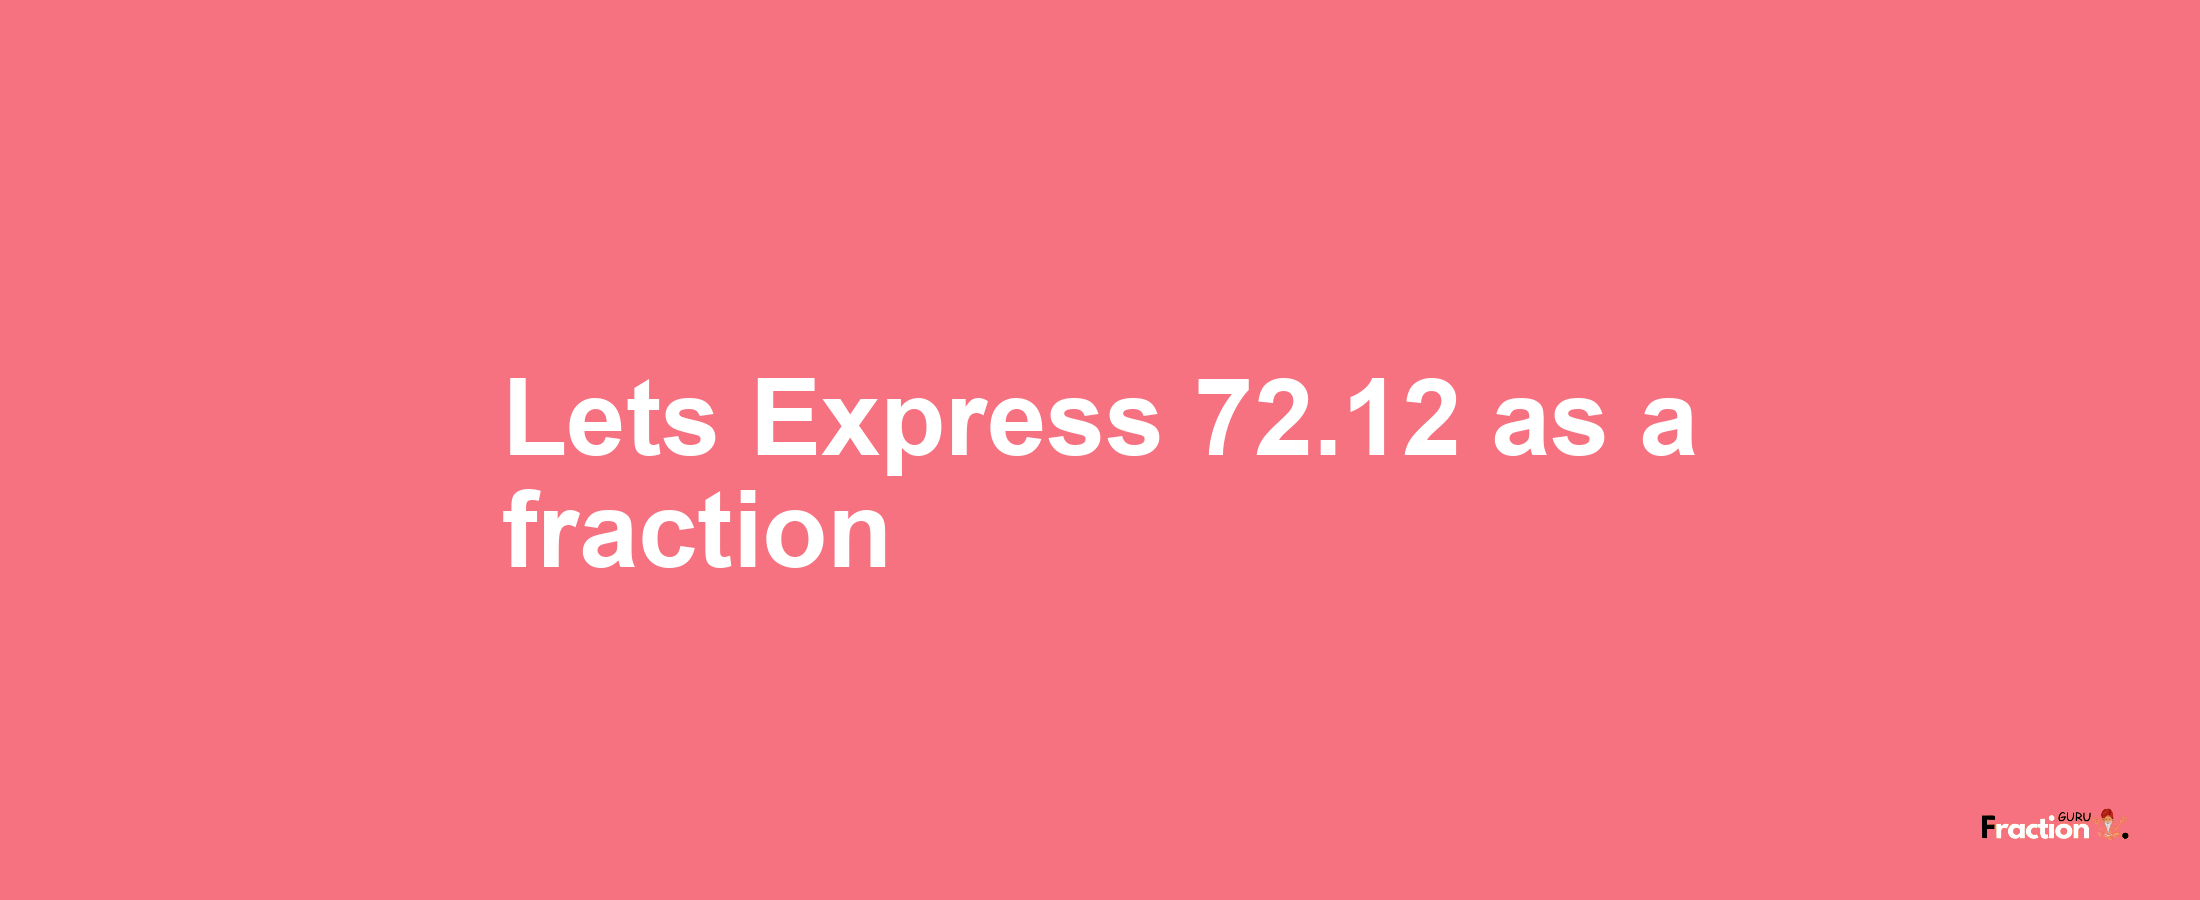 Lets Express 72.12 as afraction